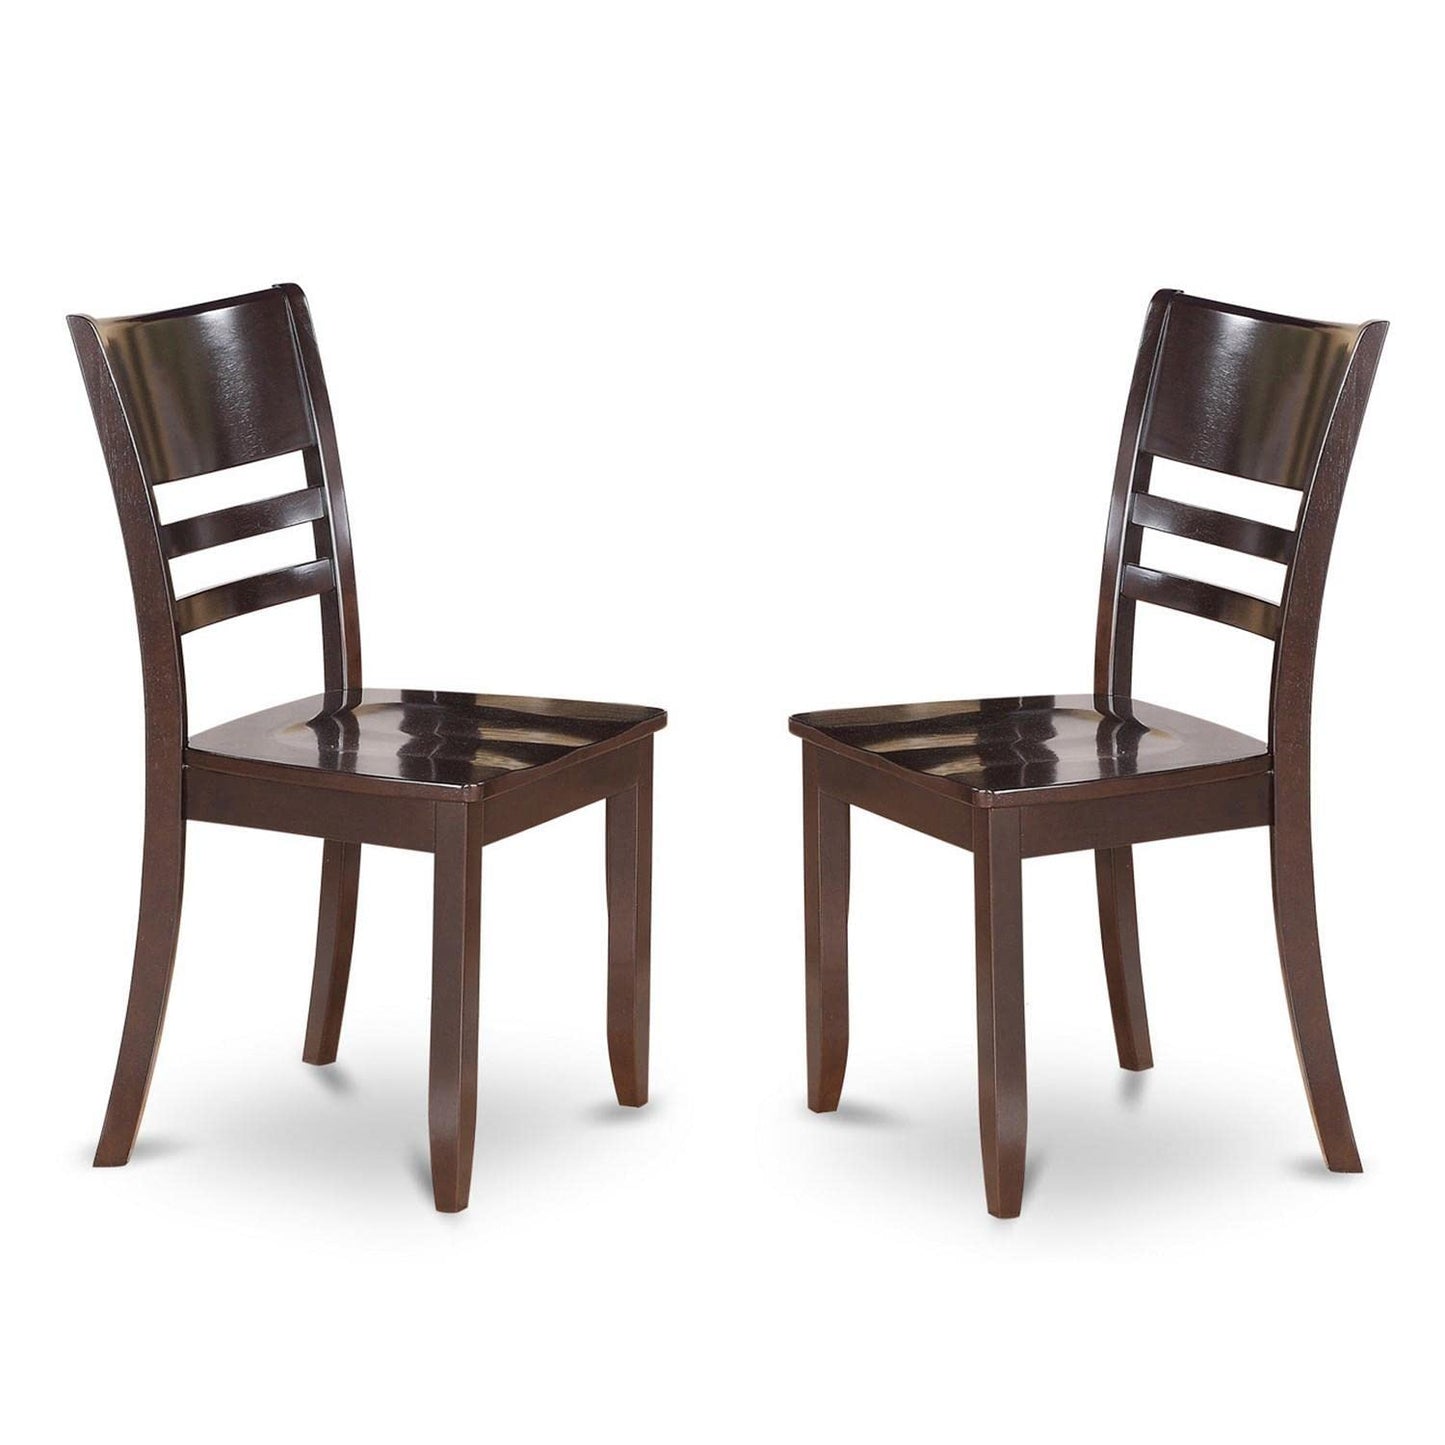 East West Furniture Lynfield Dining Room Ladder Back Solid Wood Seat Chairs, Set of 2, Cappuccino